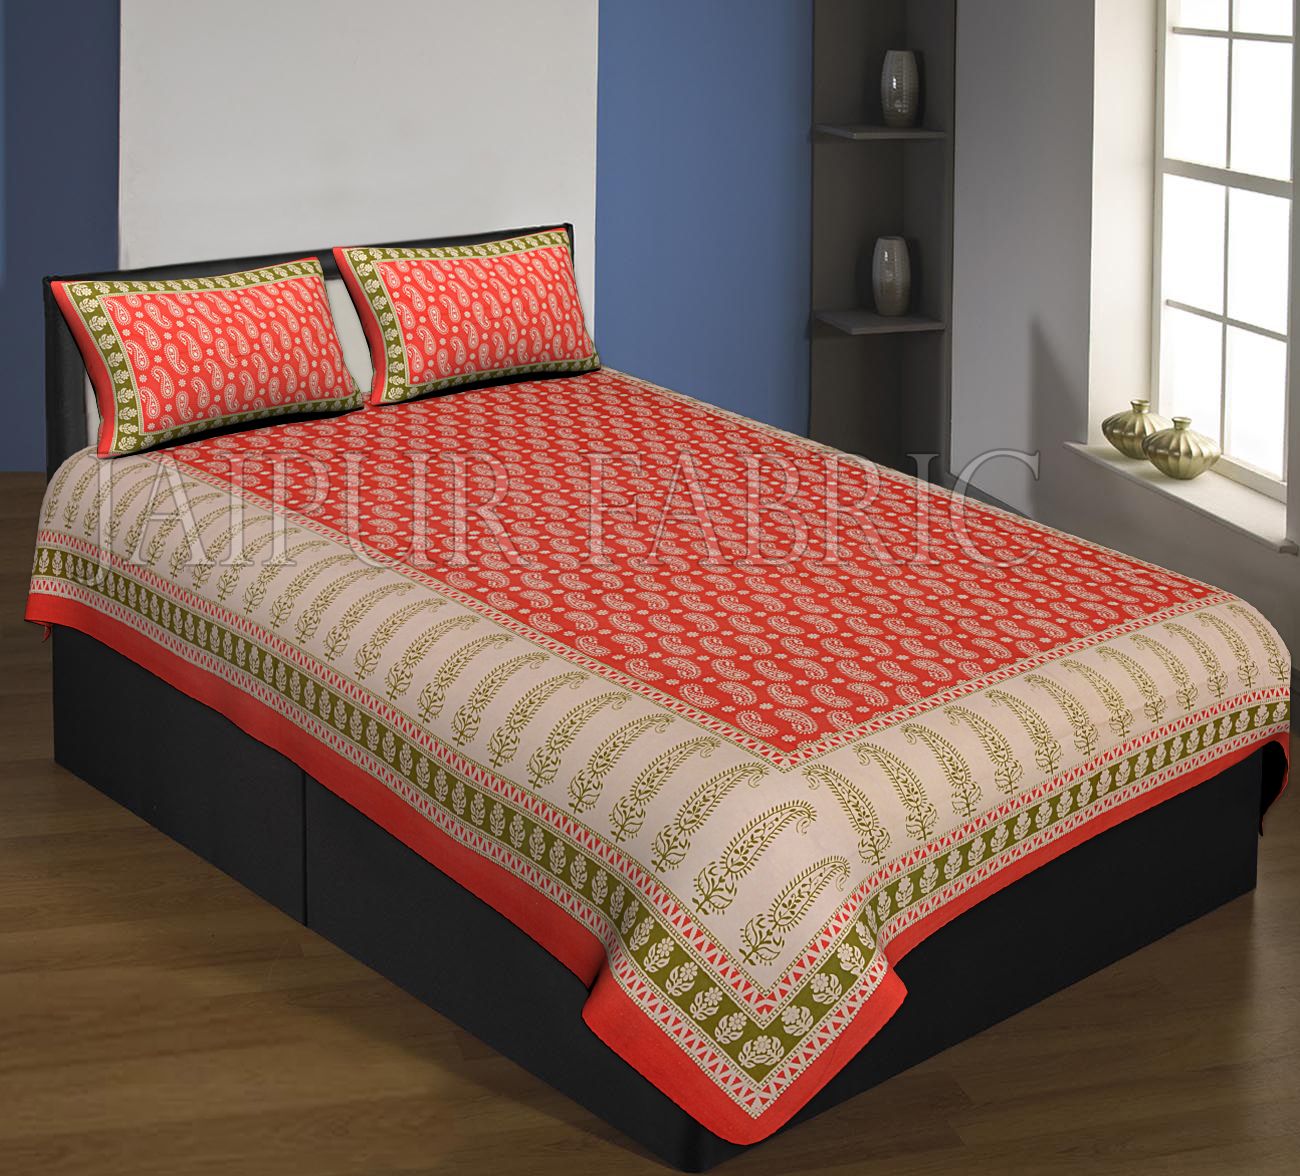 Red And Cream Boarder With Long Leaf Pattern Single Bed Sheet With 2 Pillow Cover